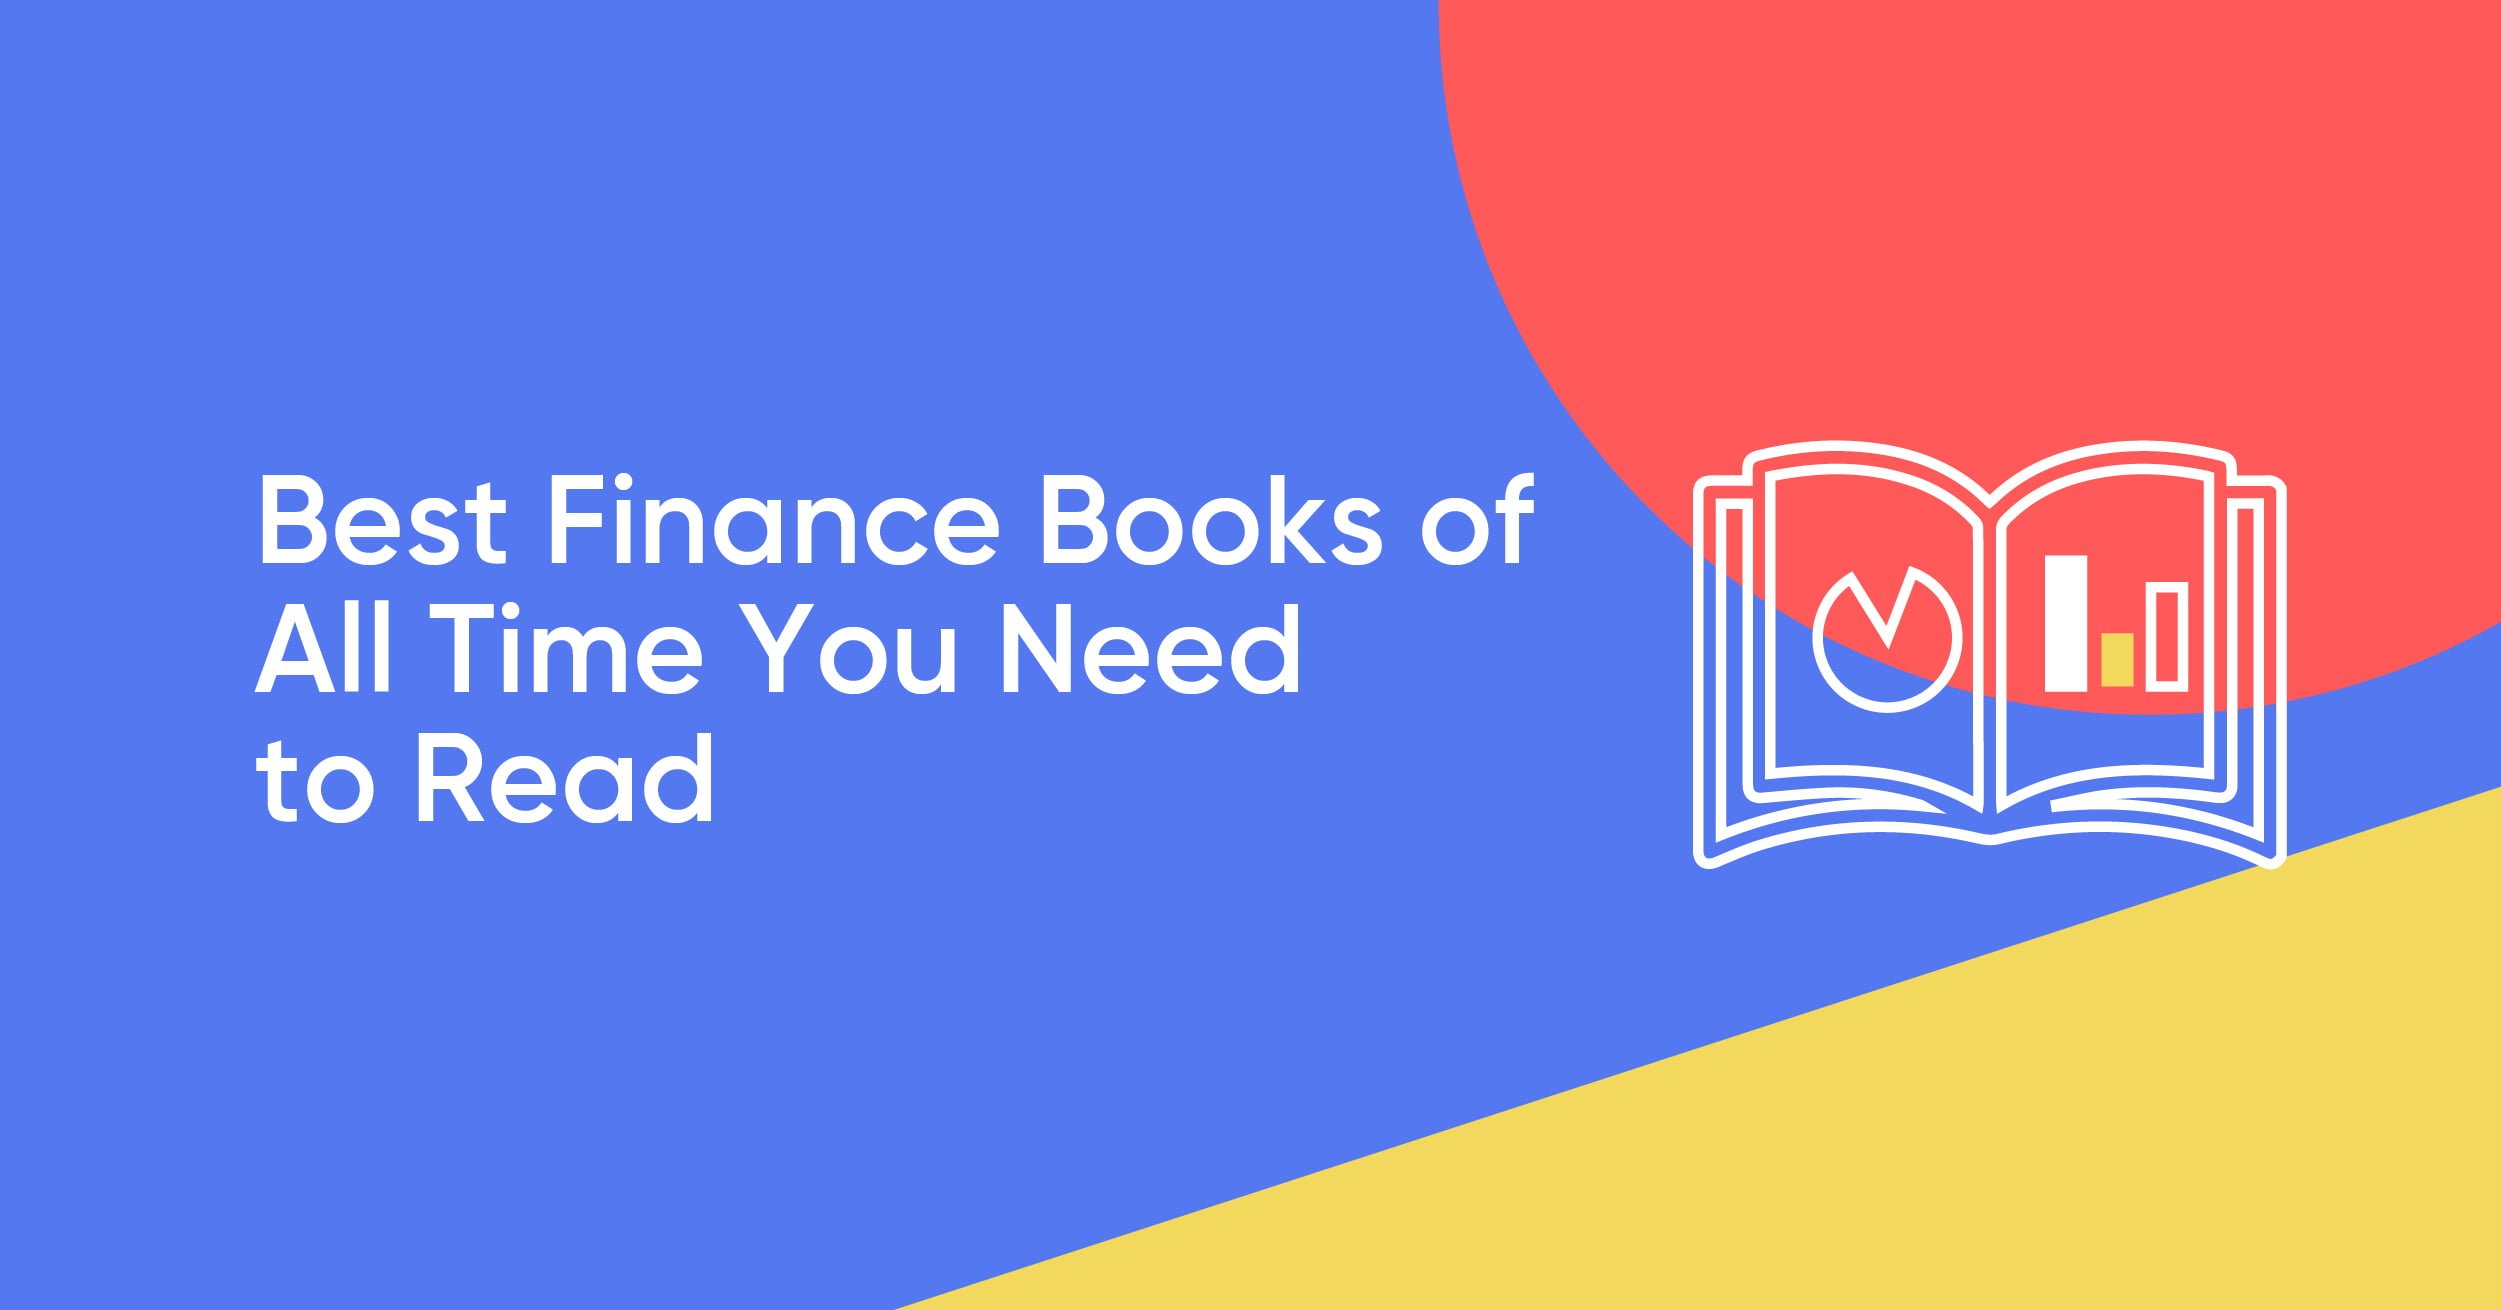 17 Best Finance Books of All Time You Need to Read